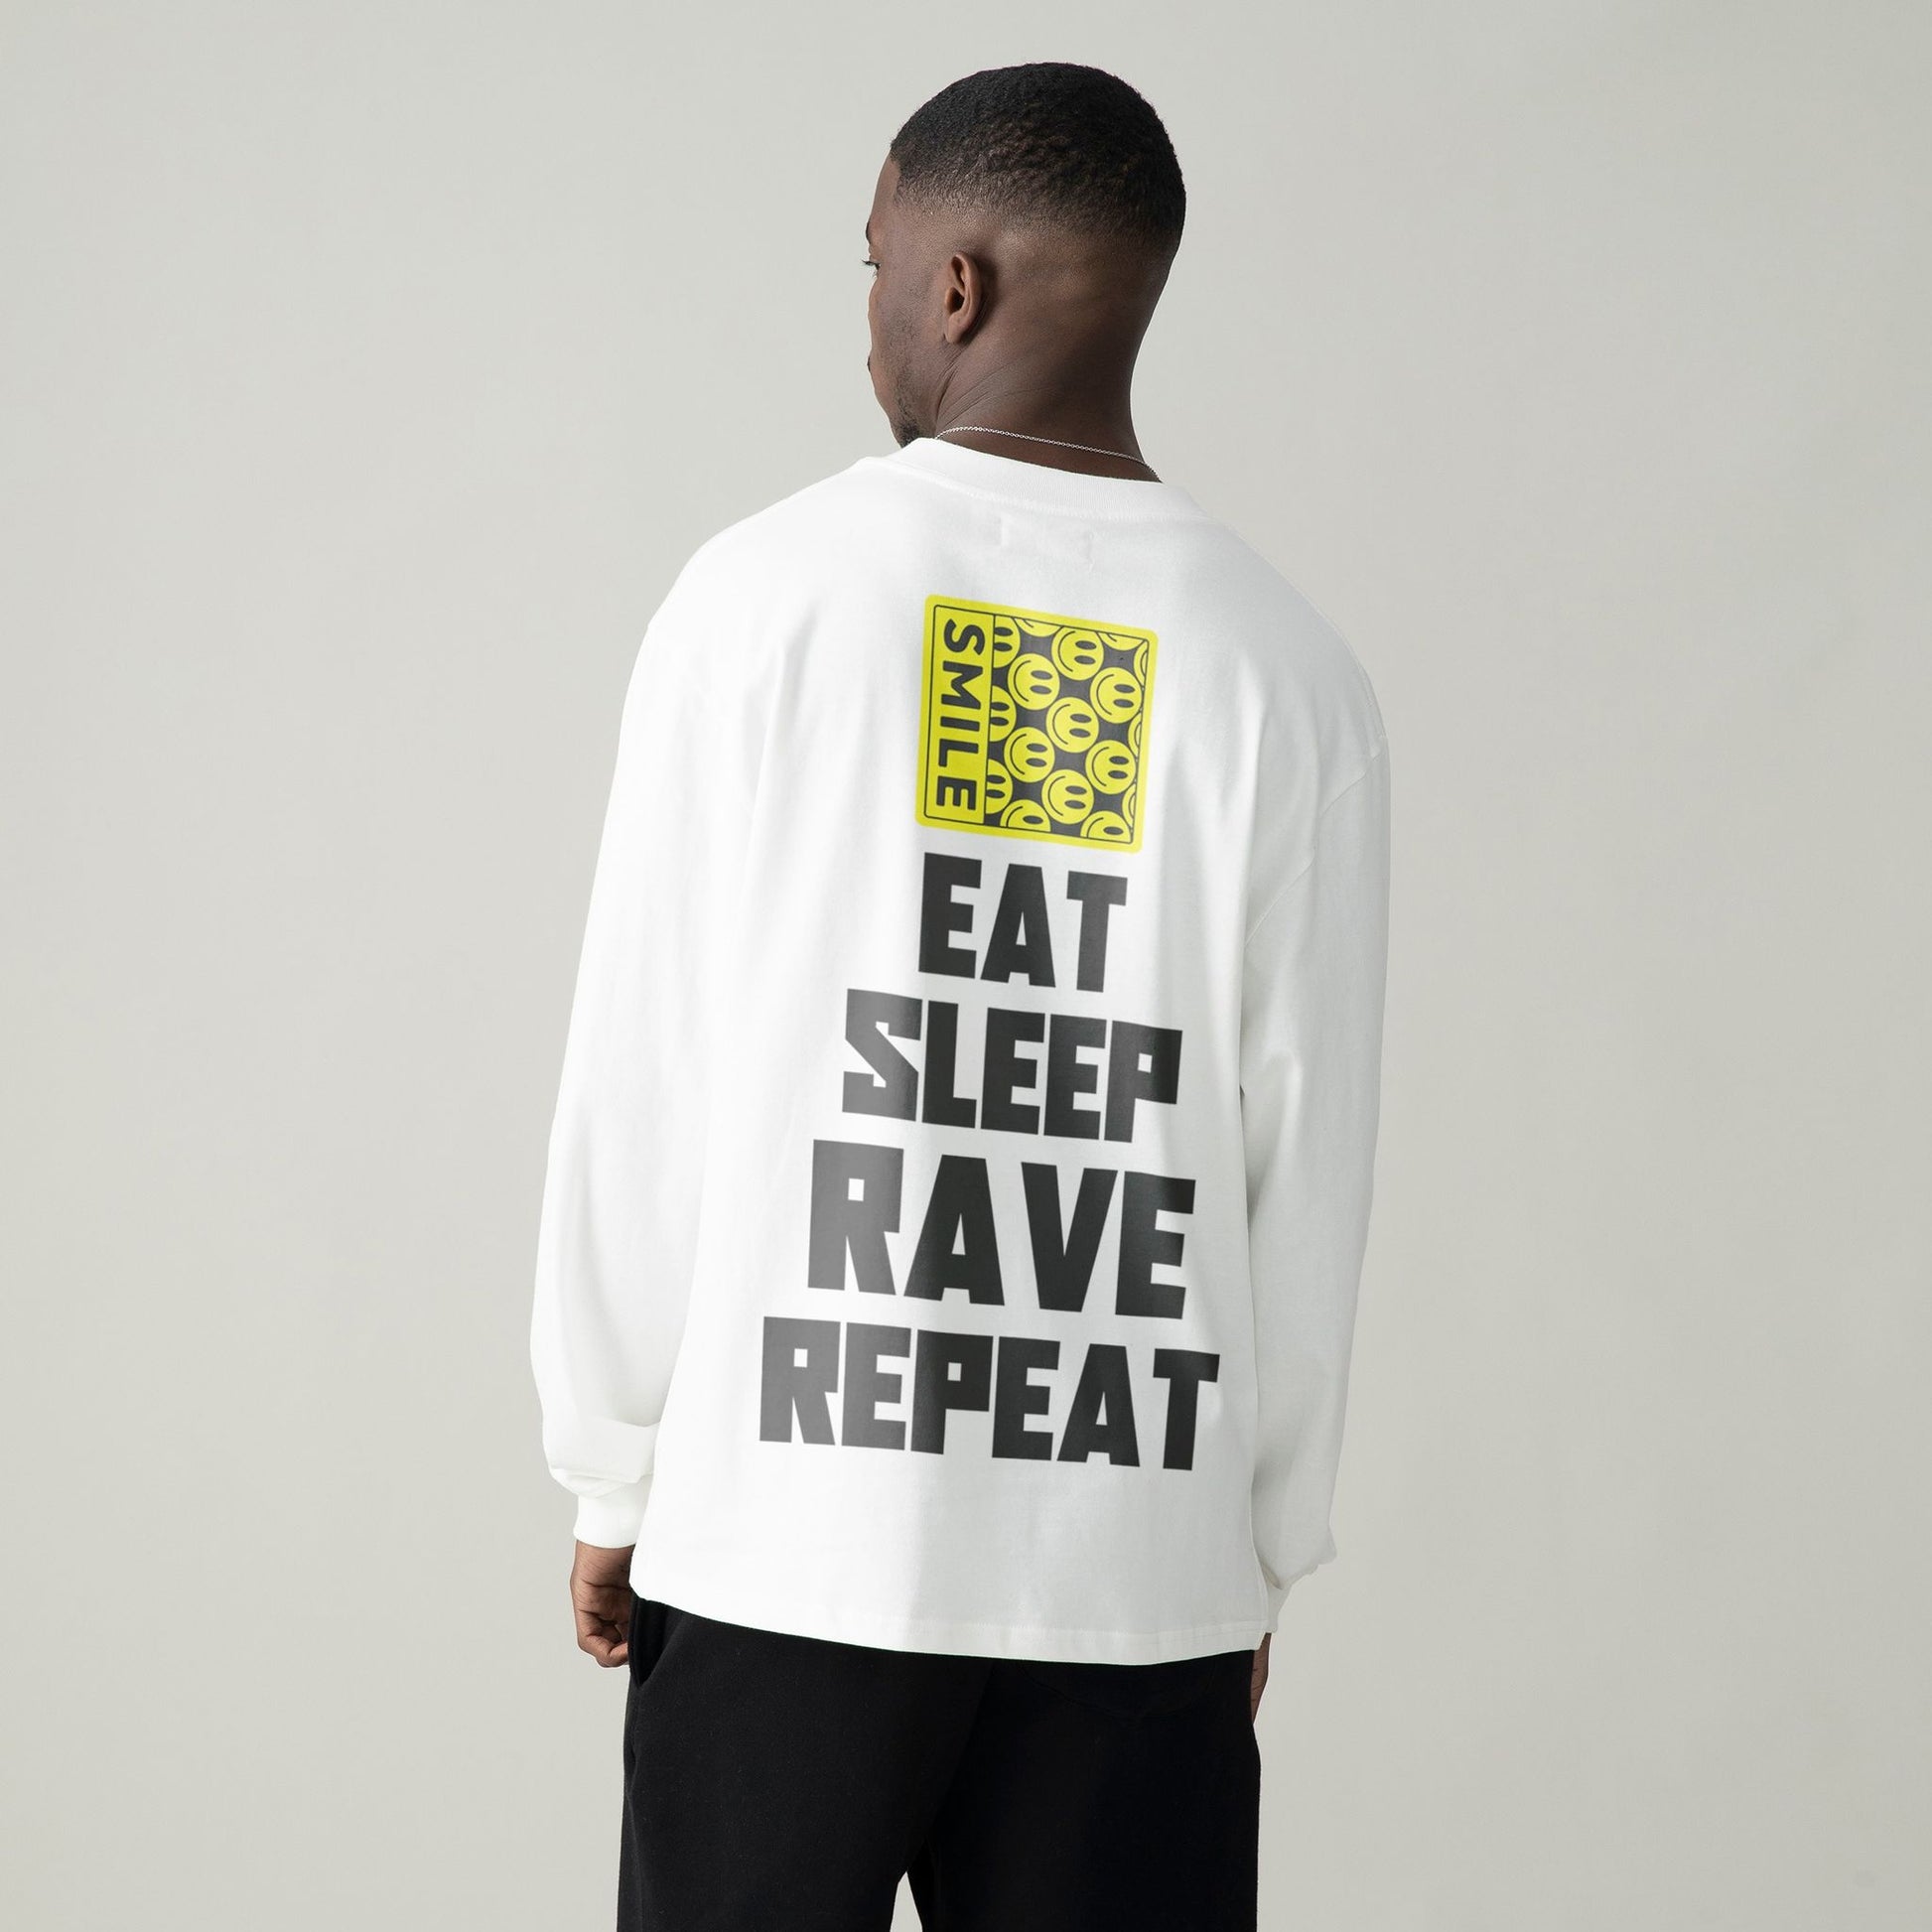  3D Effect Eat Sleep Rave Repeat T-Shirt For Ravers